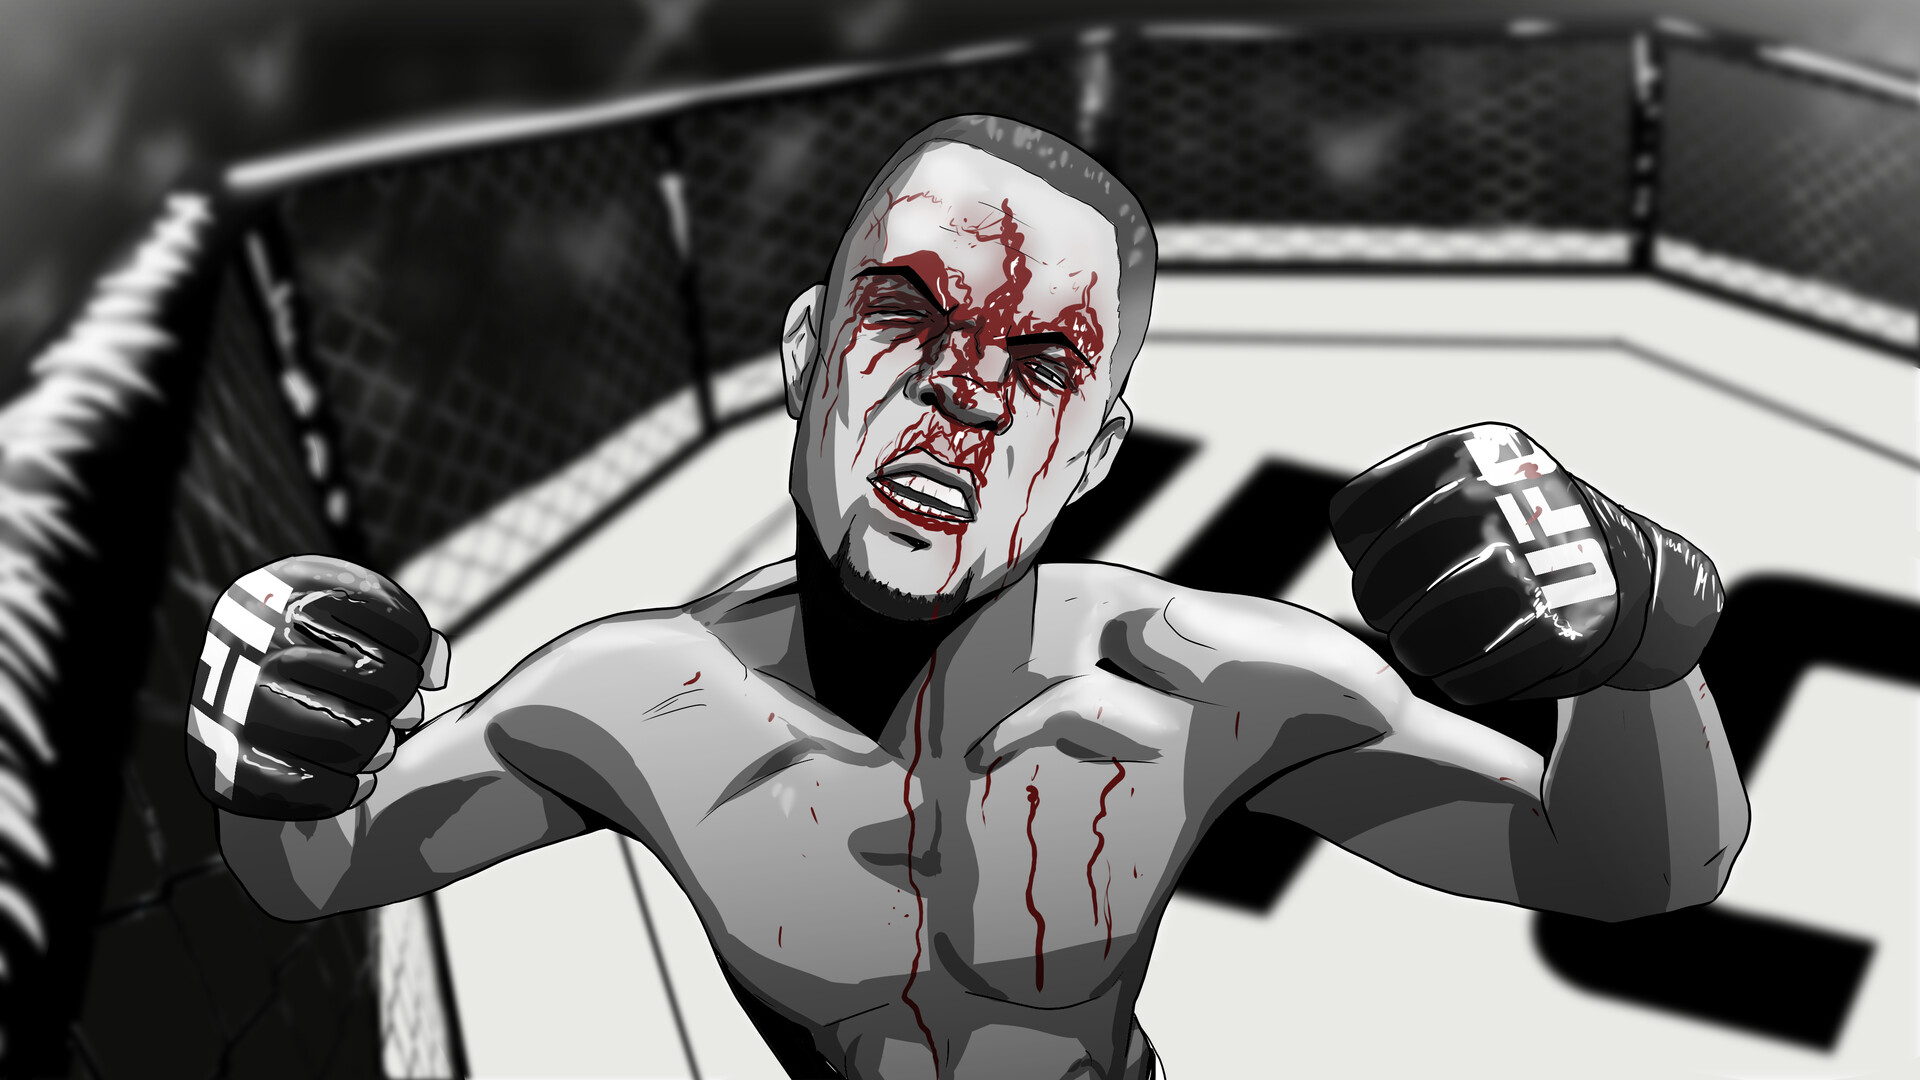 He was never in it   Mma boxing Nate diaz Mma fighting